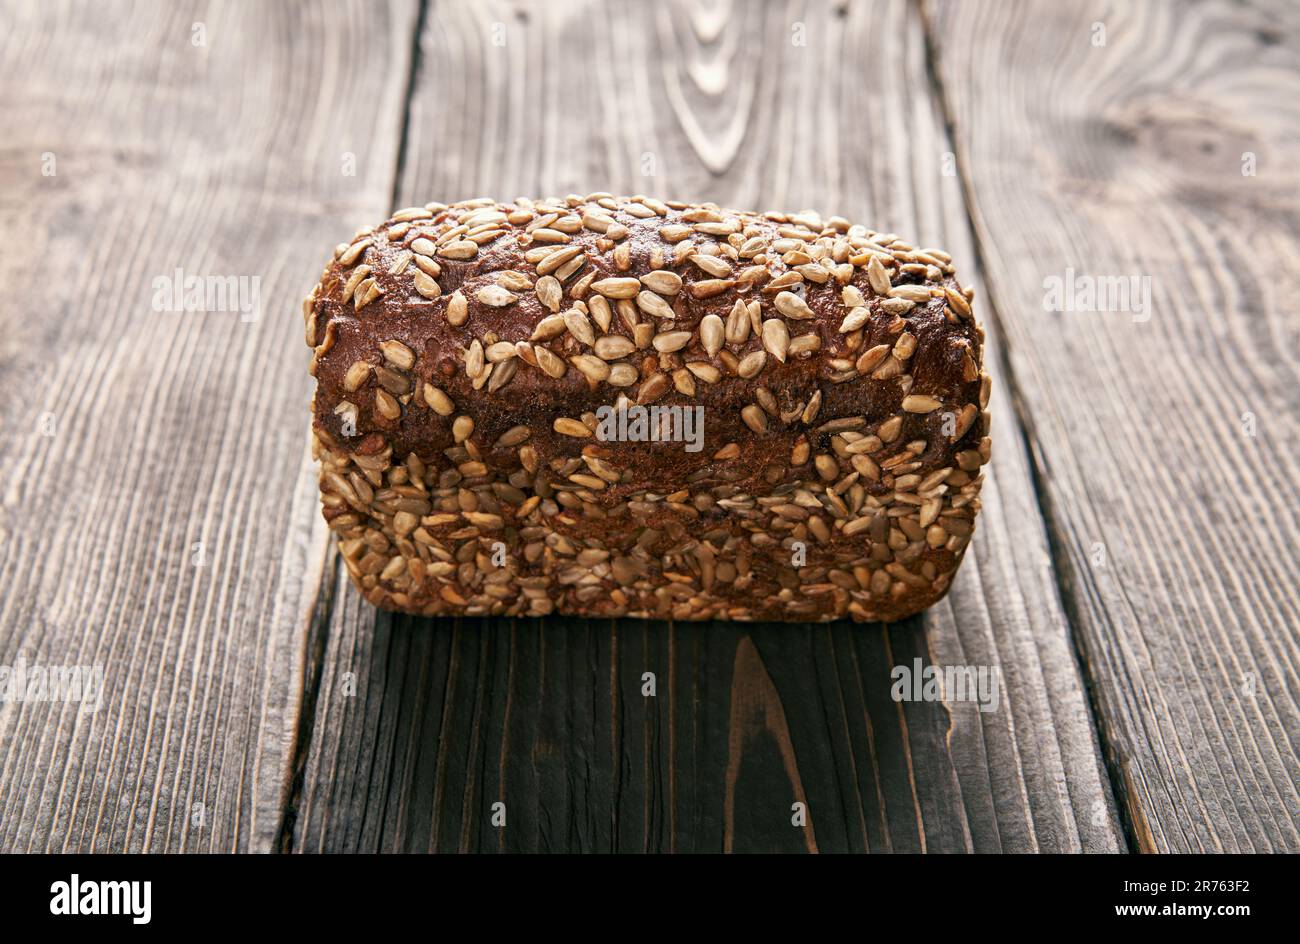 Loaf of fresh made rye multigrain bread on wooden table background. Bakery, food concept Stock Photo